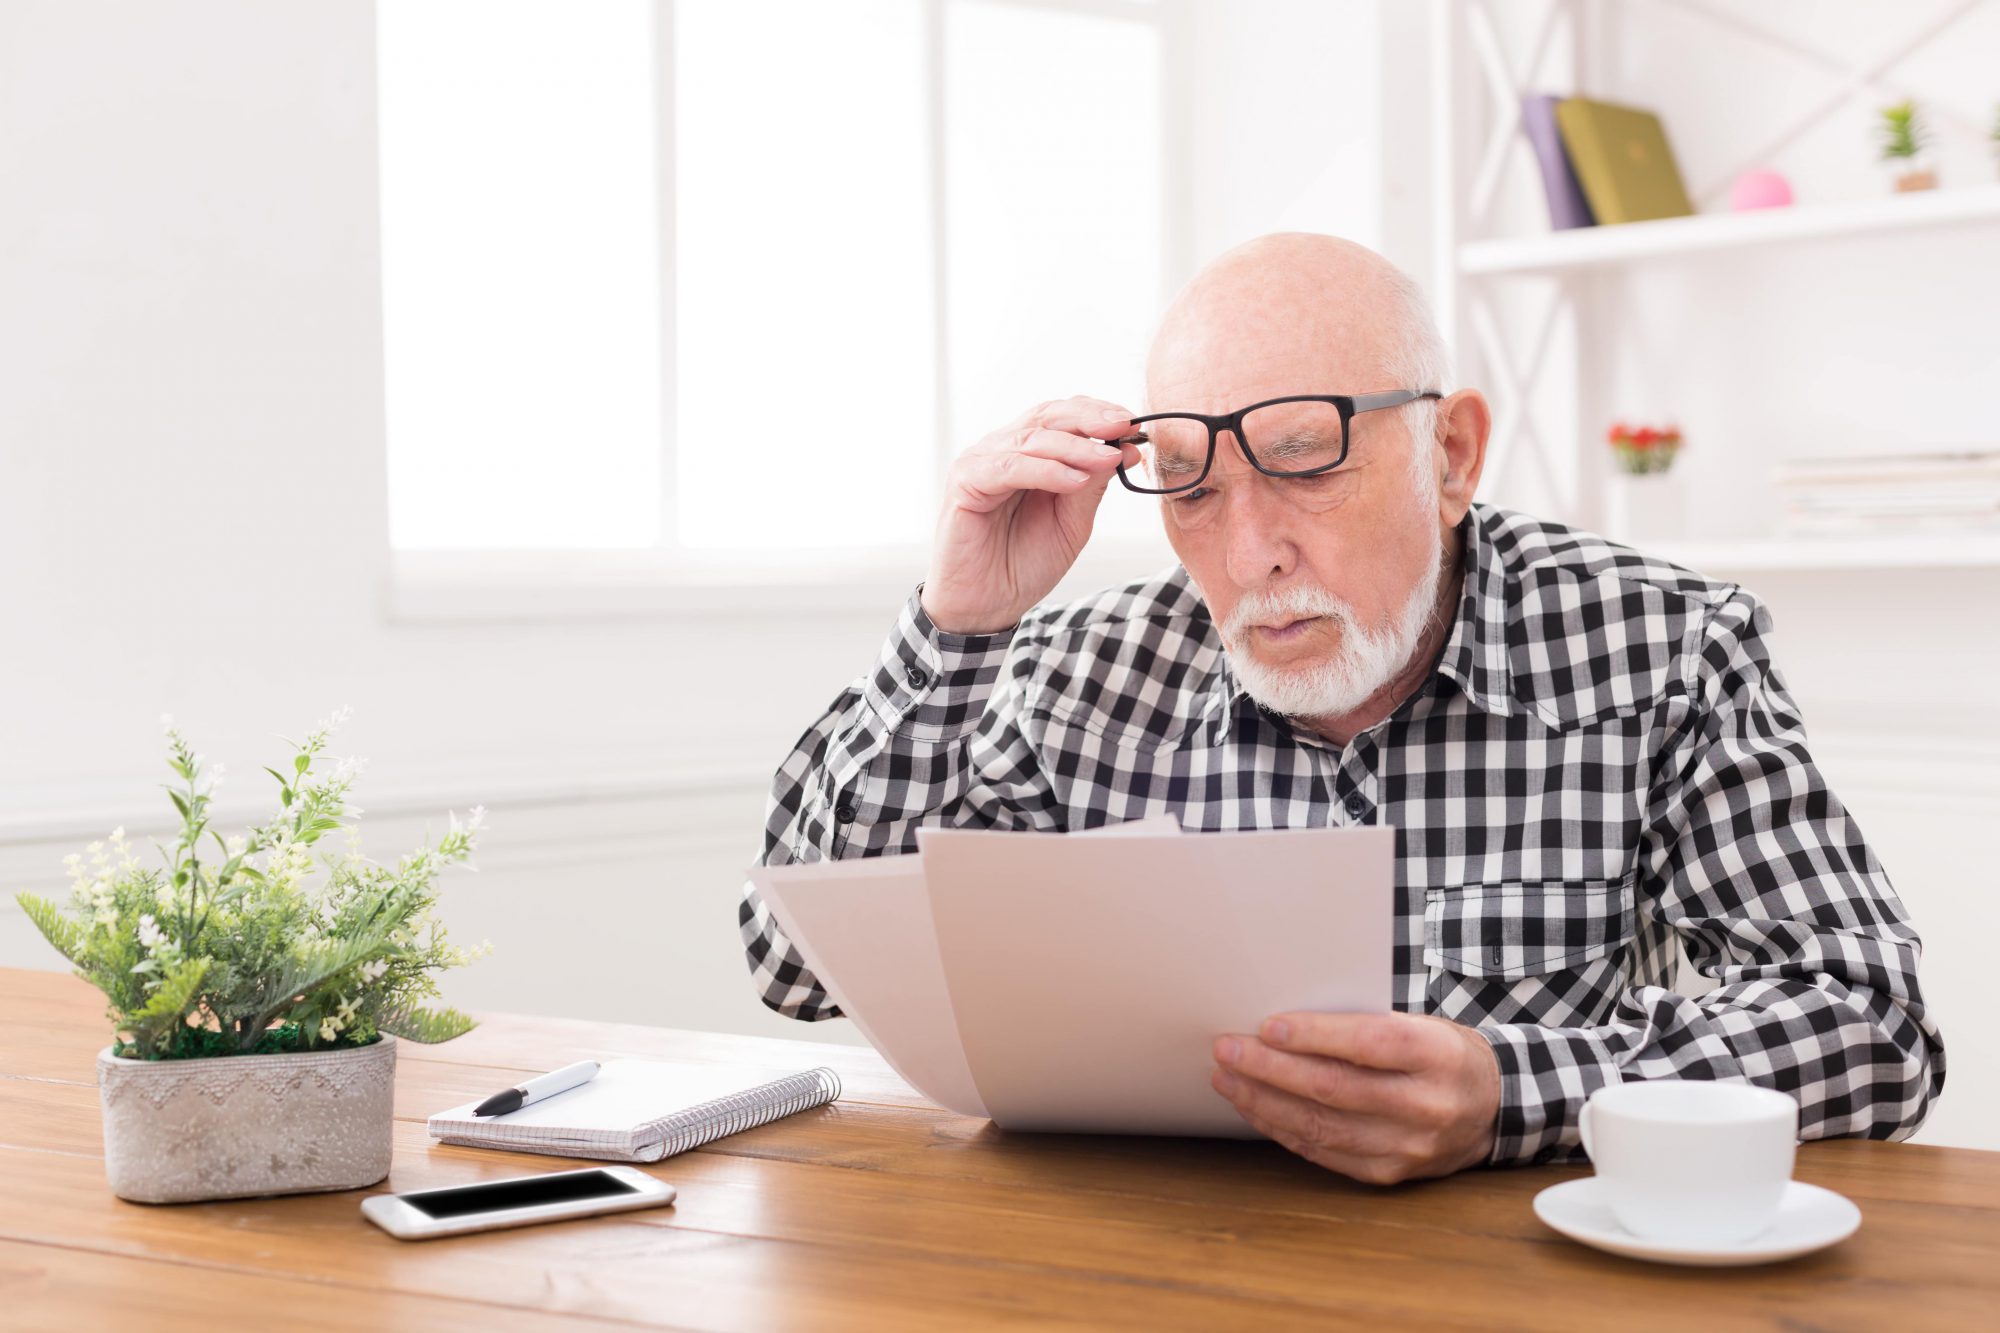 man having difficulty reading as his eyes age and he develops presbyopia